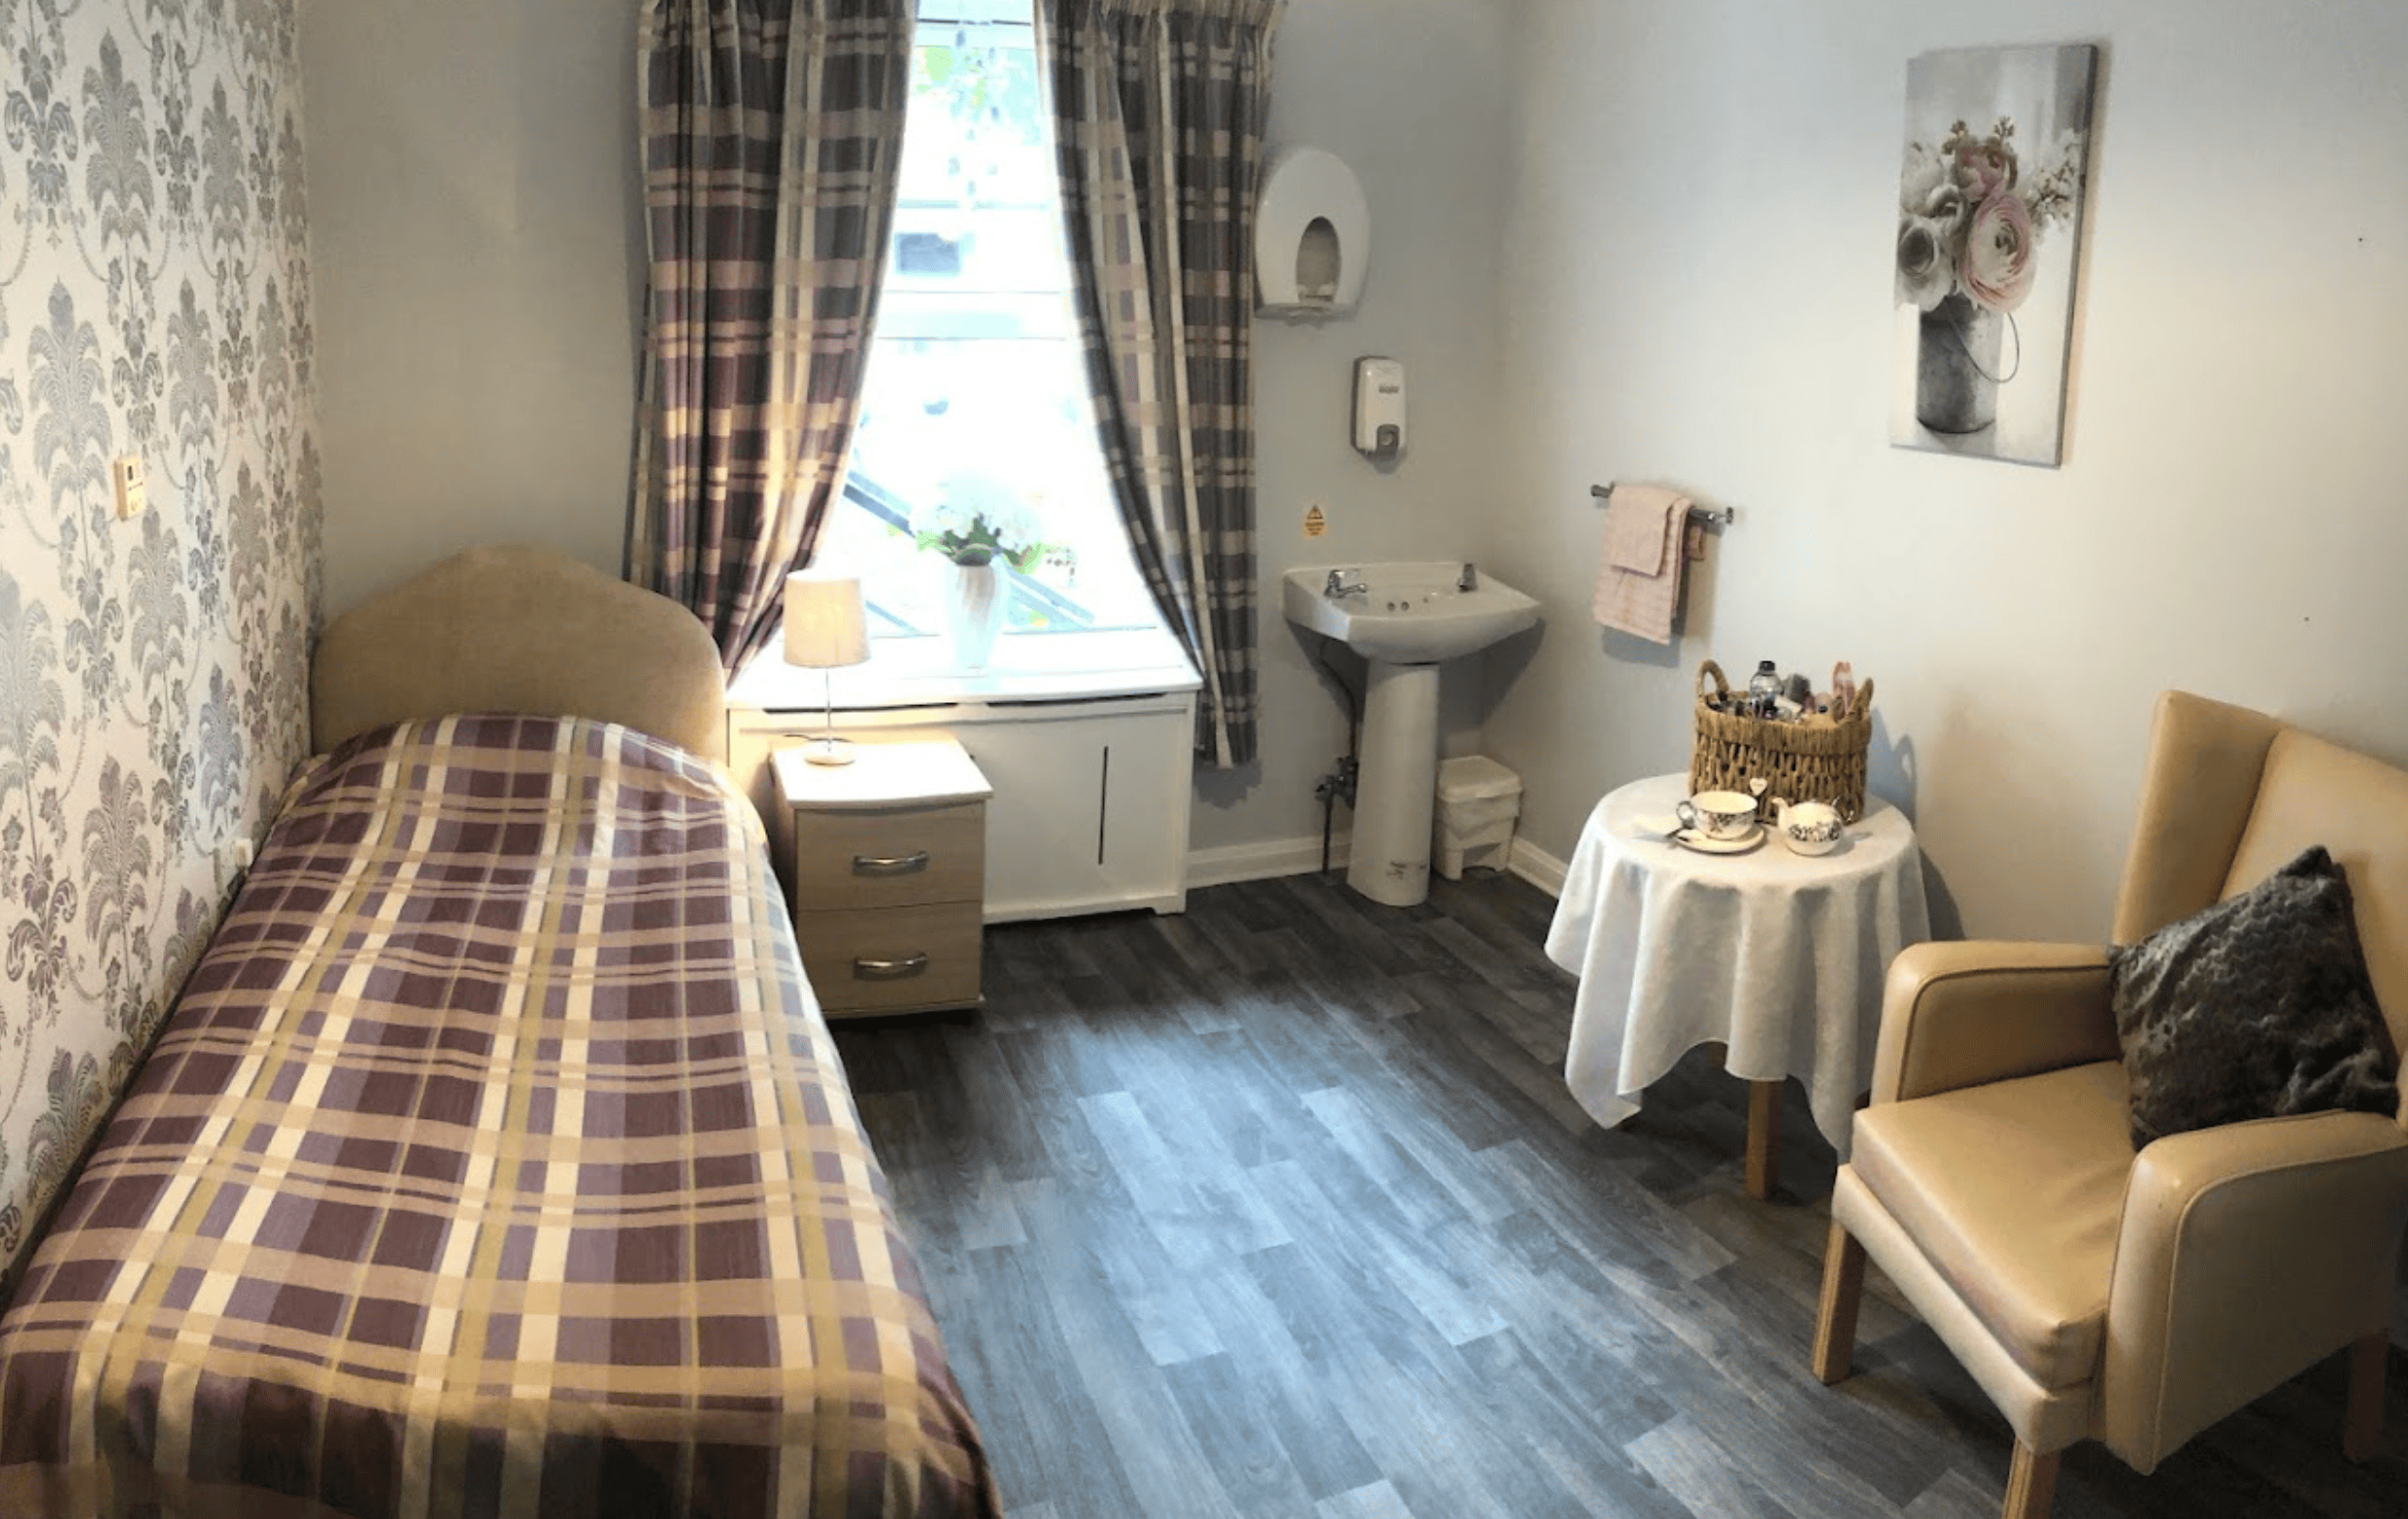 Bedroom of Burnfoot care home in Ayr, Scotland